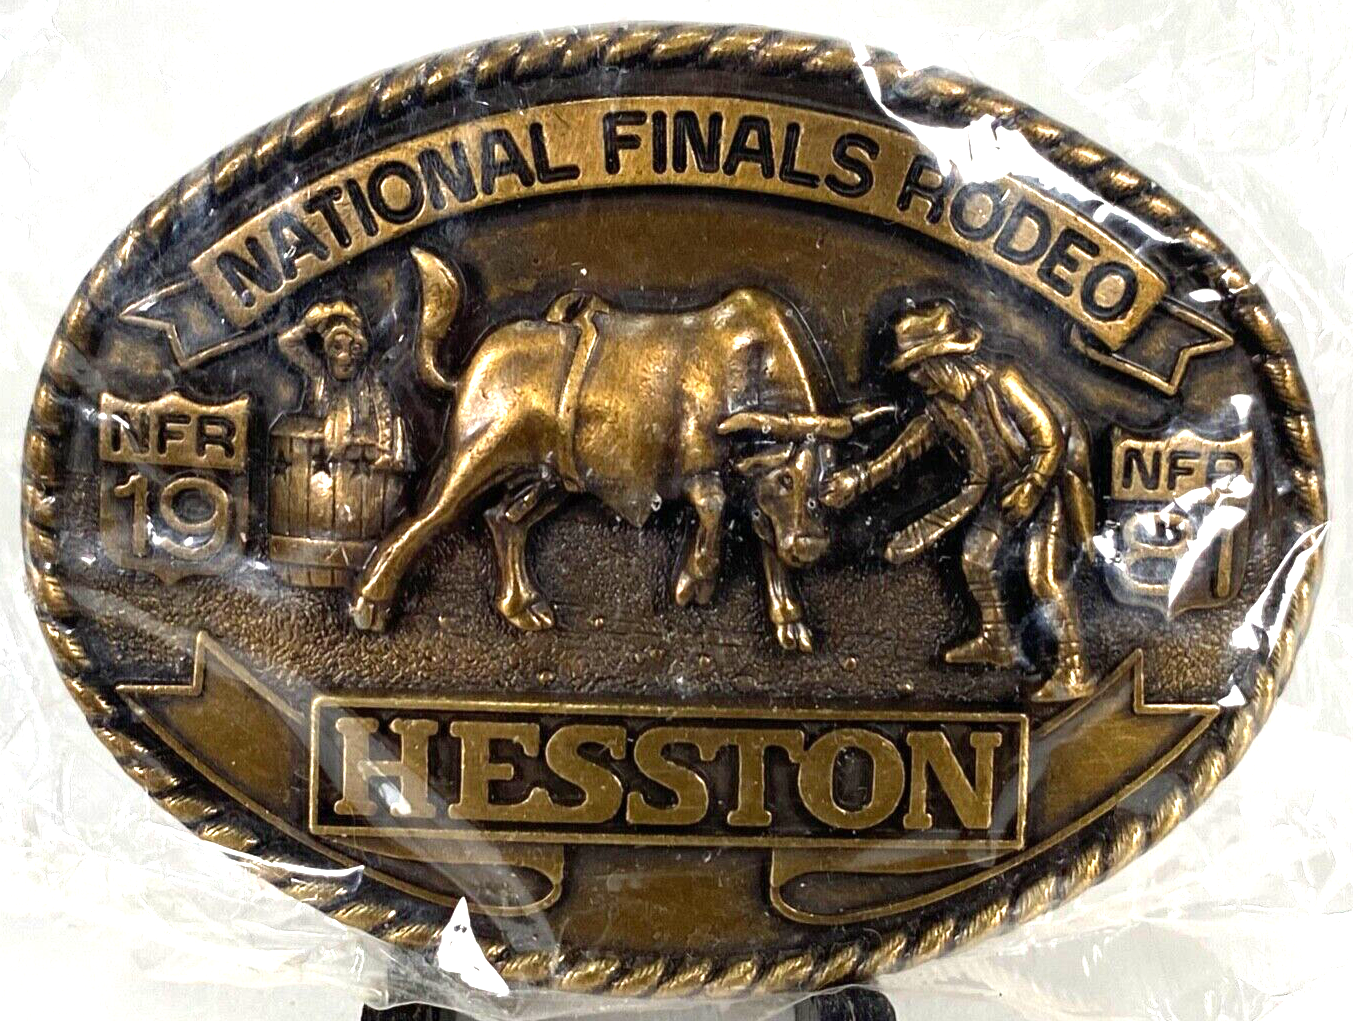 Primary image for Hesston National Finals Rodeo Belt Buckle-Brass-Proffesional Cowboys-Vtg 1981